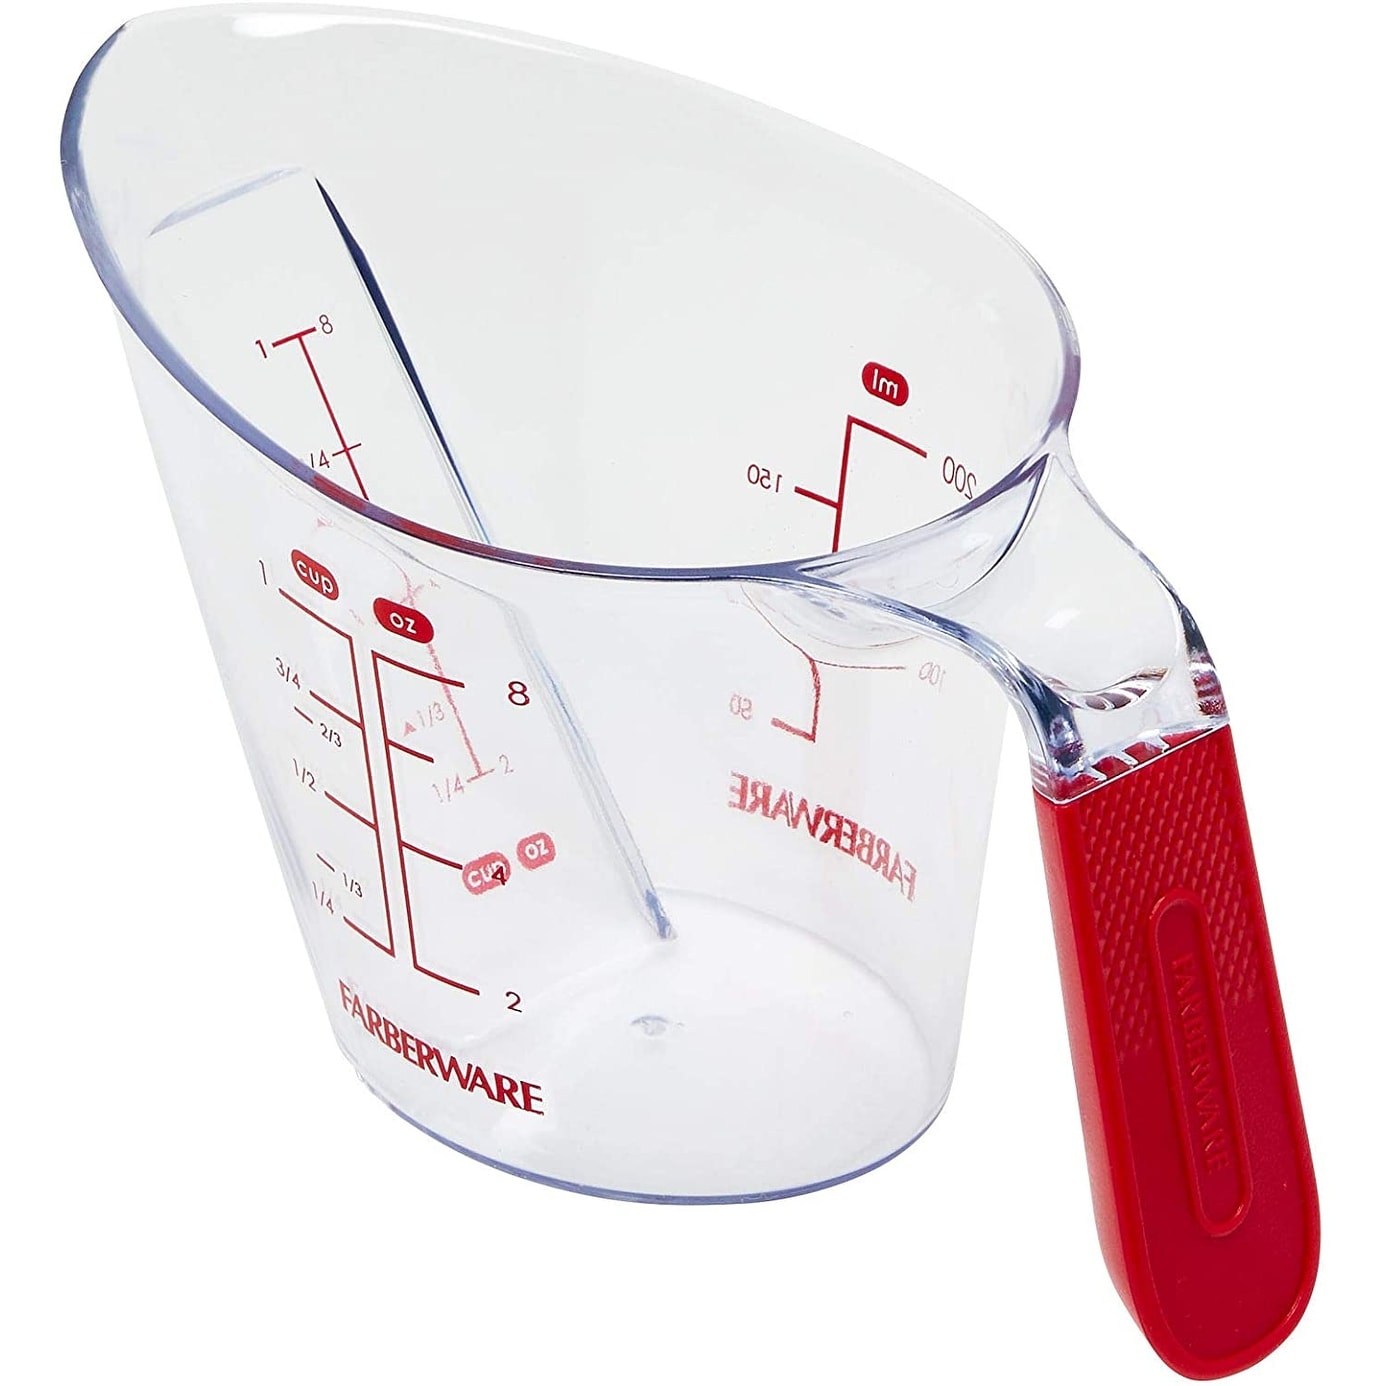 https://ak1.ostkcdn.com/images/products/is/images/direct/c79bd2ec453b018b48e2dde2441c1ea29c17e8f3/Farberware-Pro-Angled-Measuring-Cup.jpg